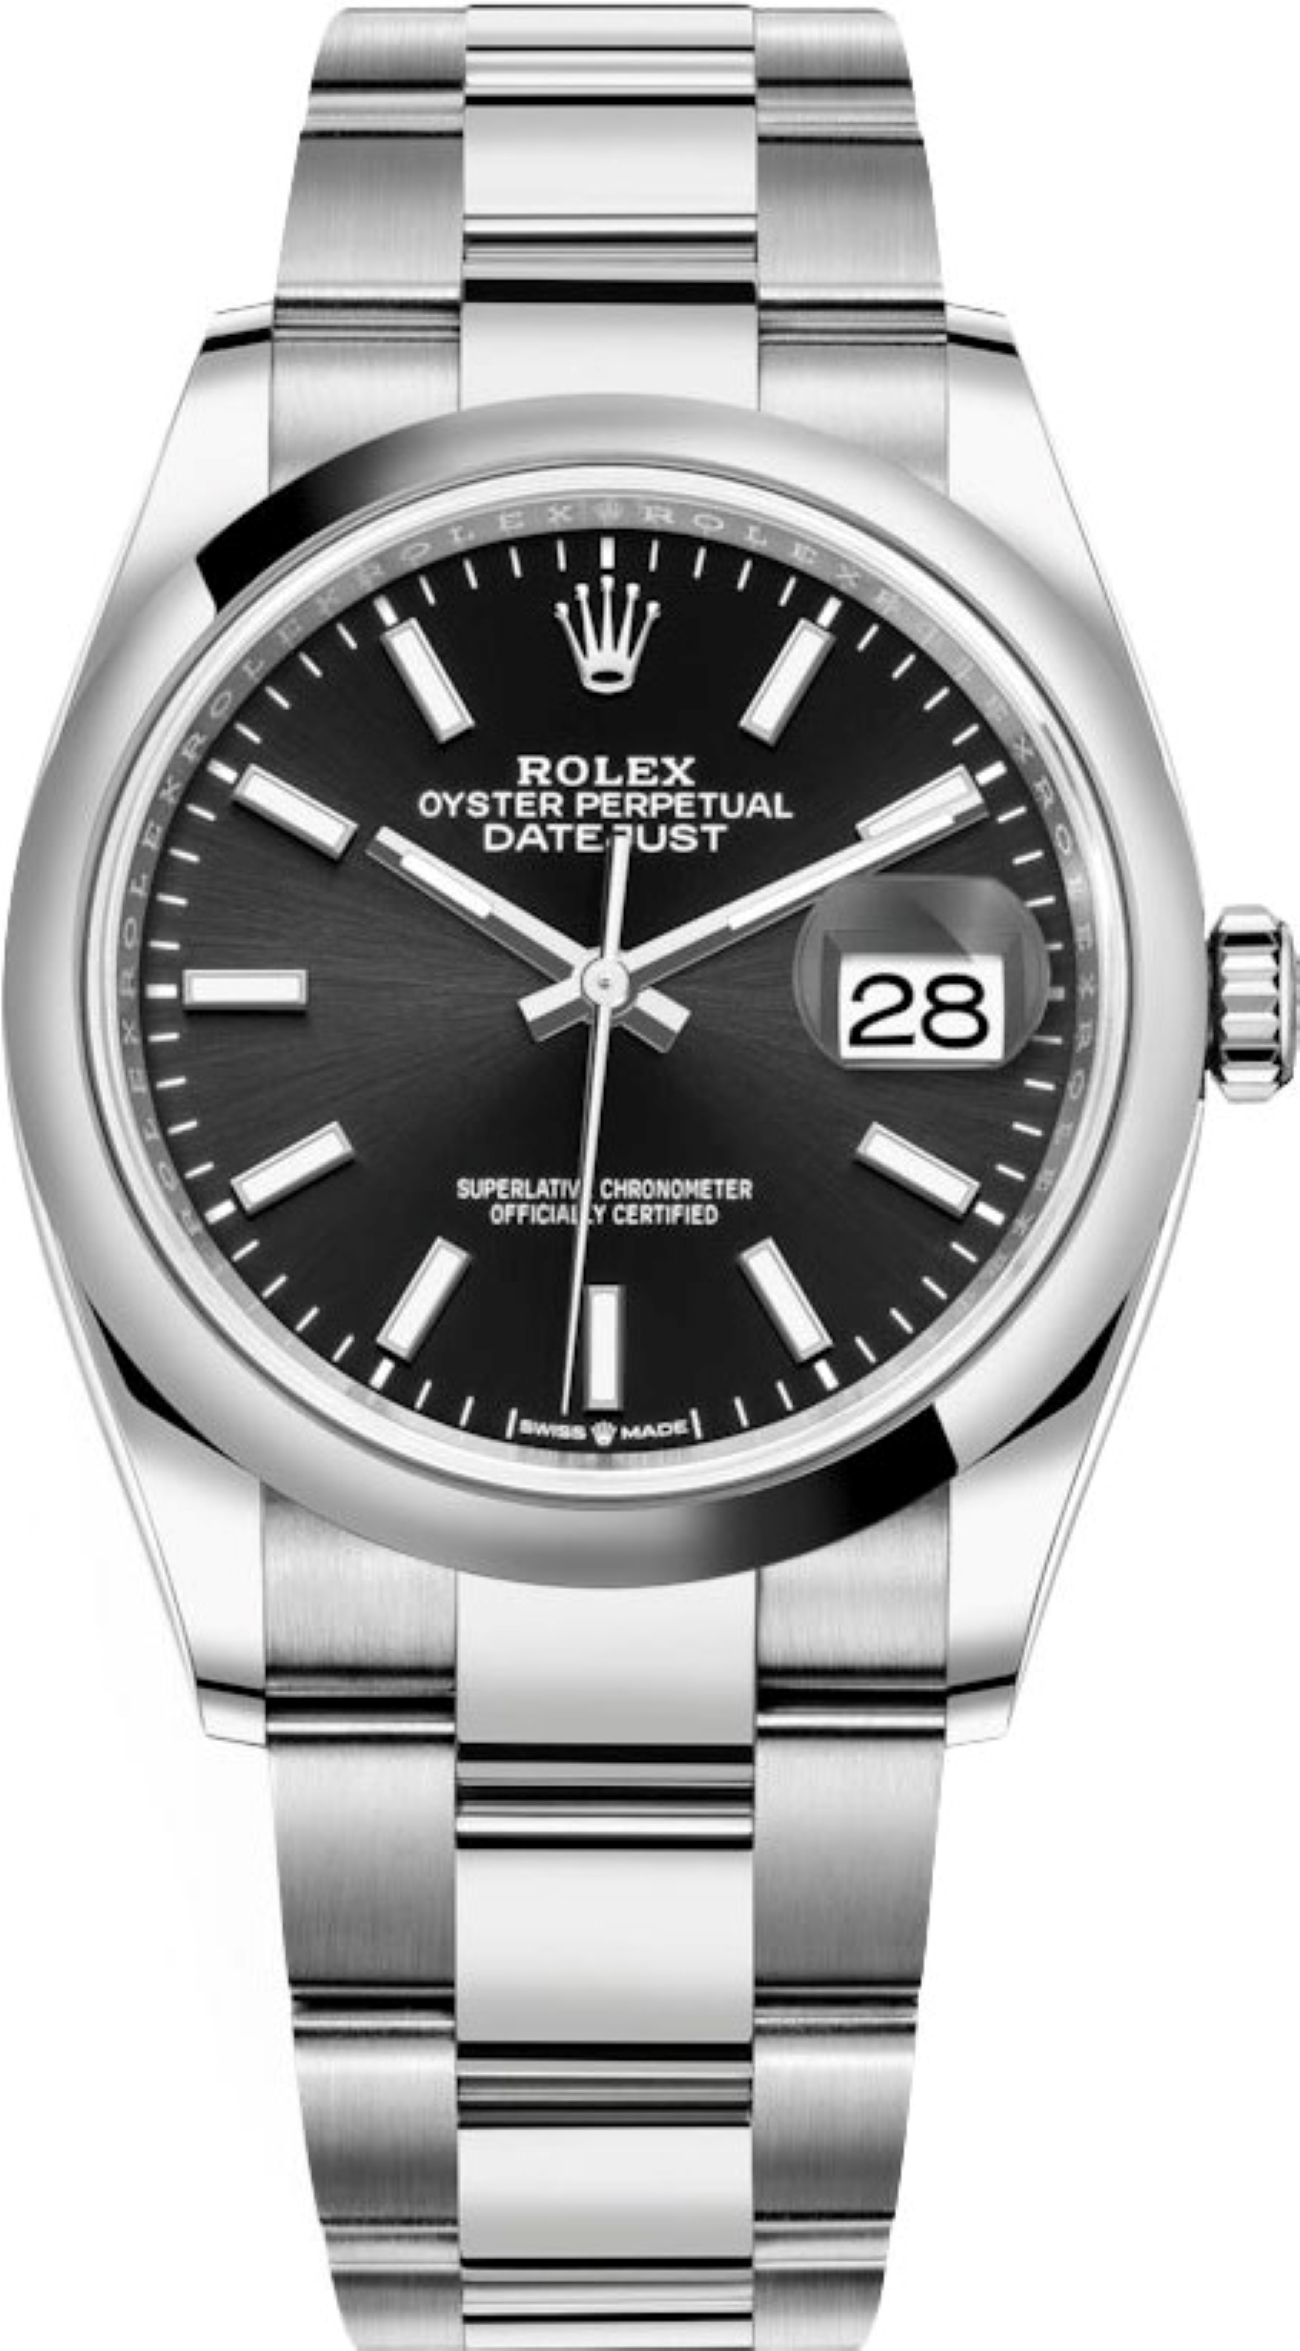 ROLEX DATEJUST 36 BLACK DIAL SMOOTH BEZEL OYSTER STEEL AUTOMATIC REF: 126200